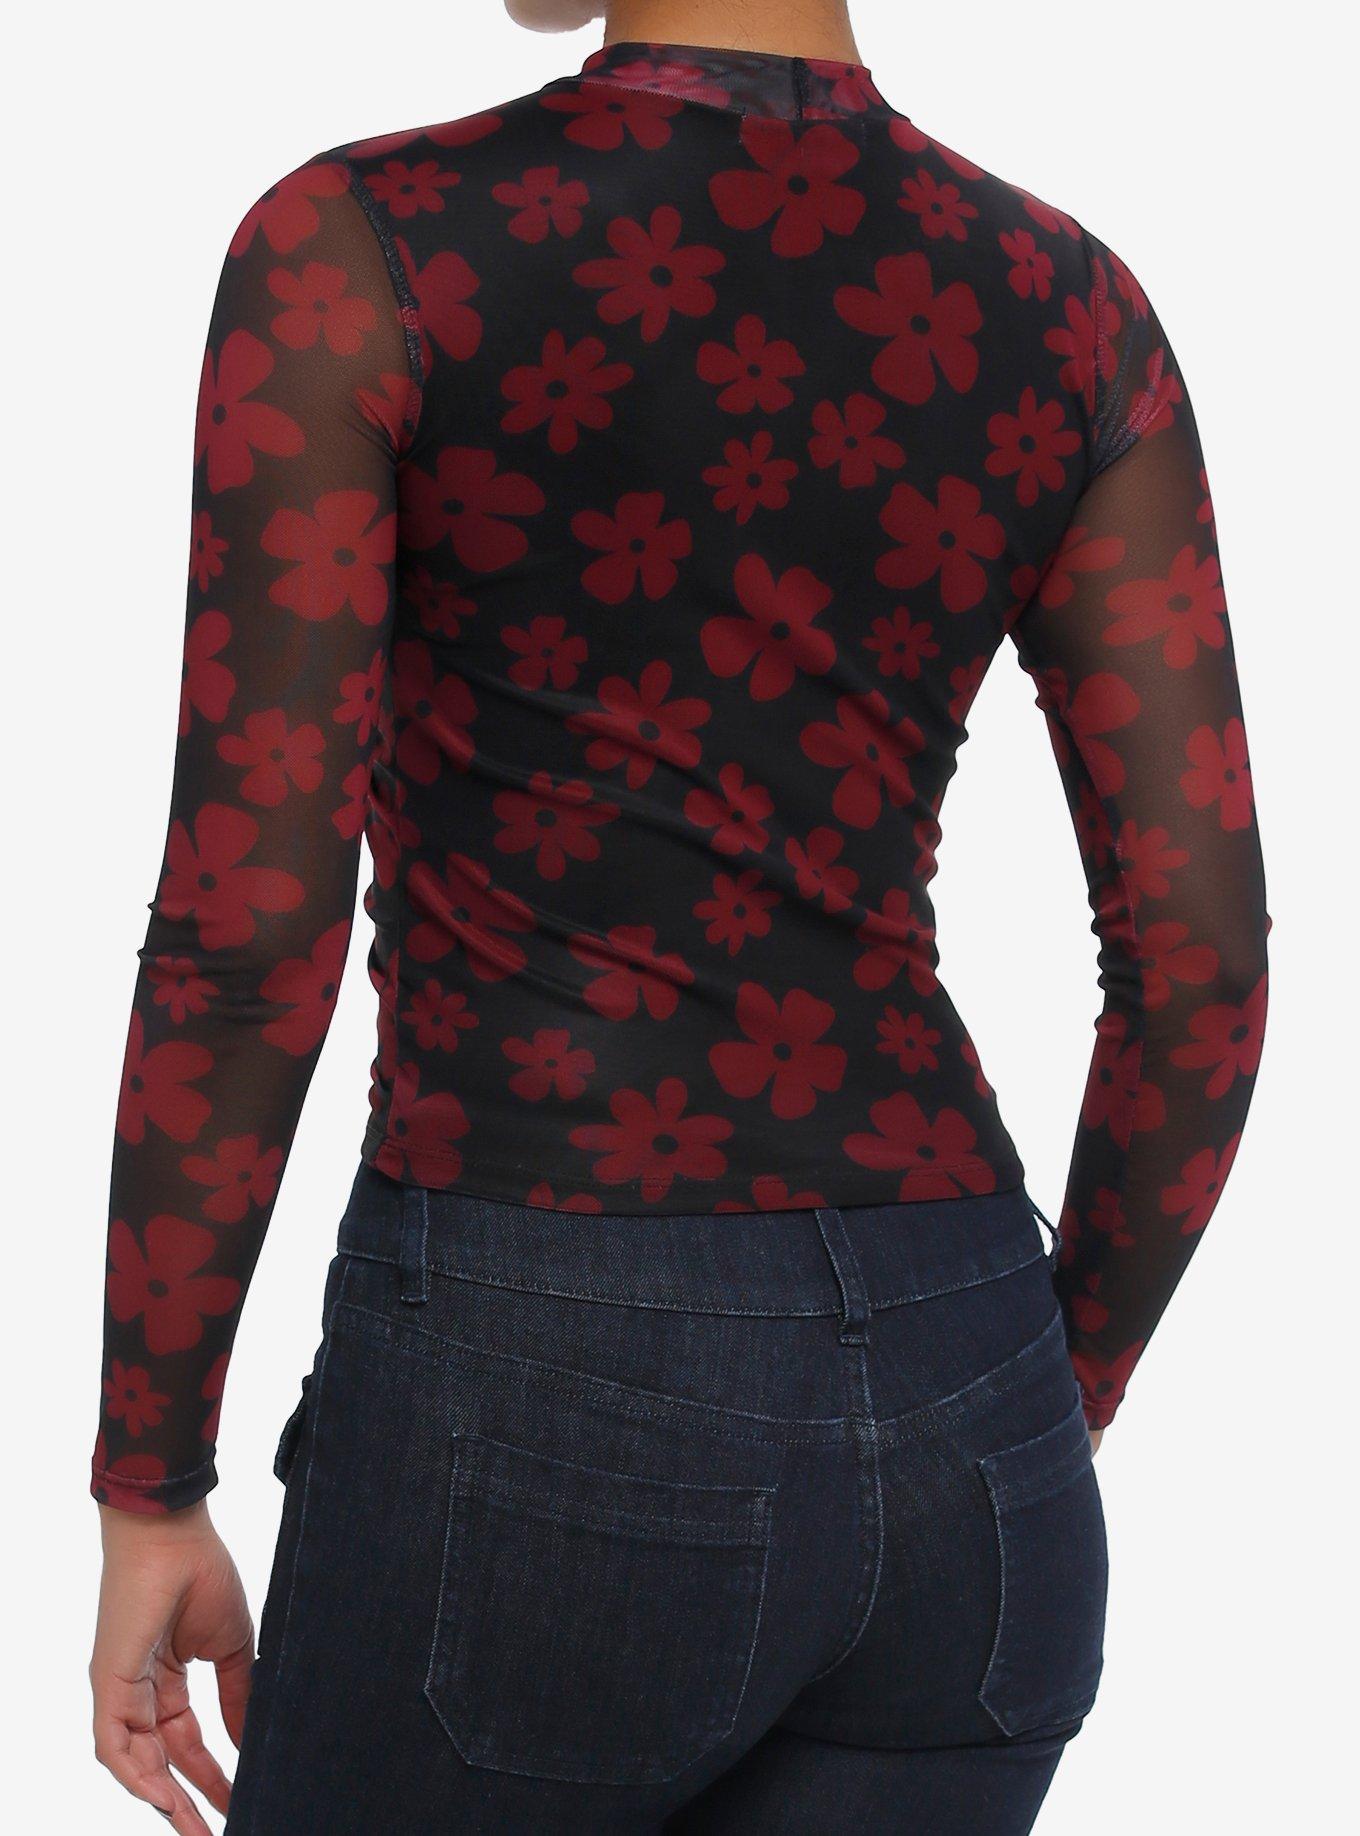 Thorn & Fable Red Daisy Mesh Girls Long-Sleeve Top